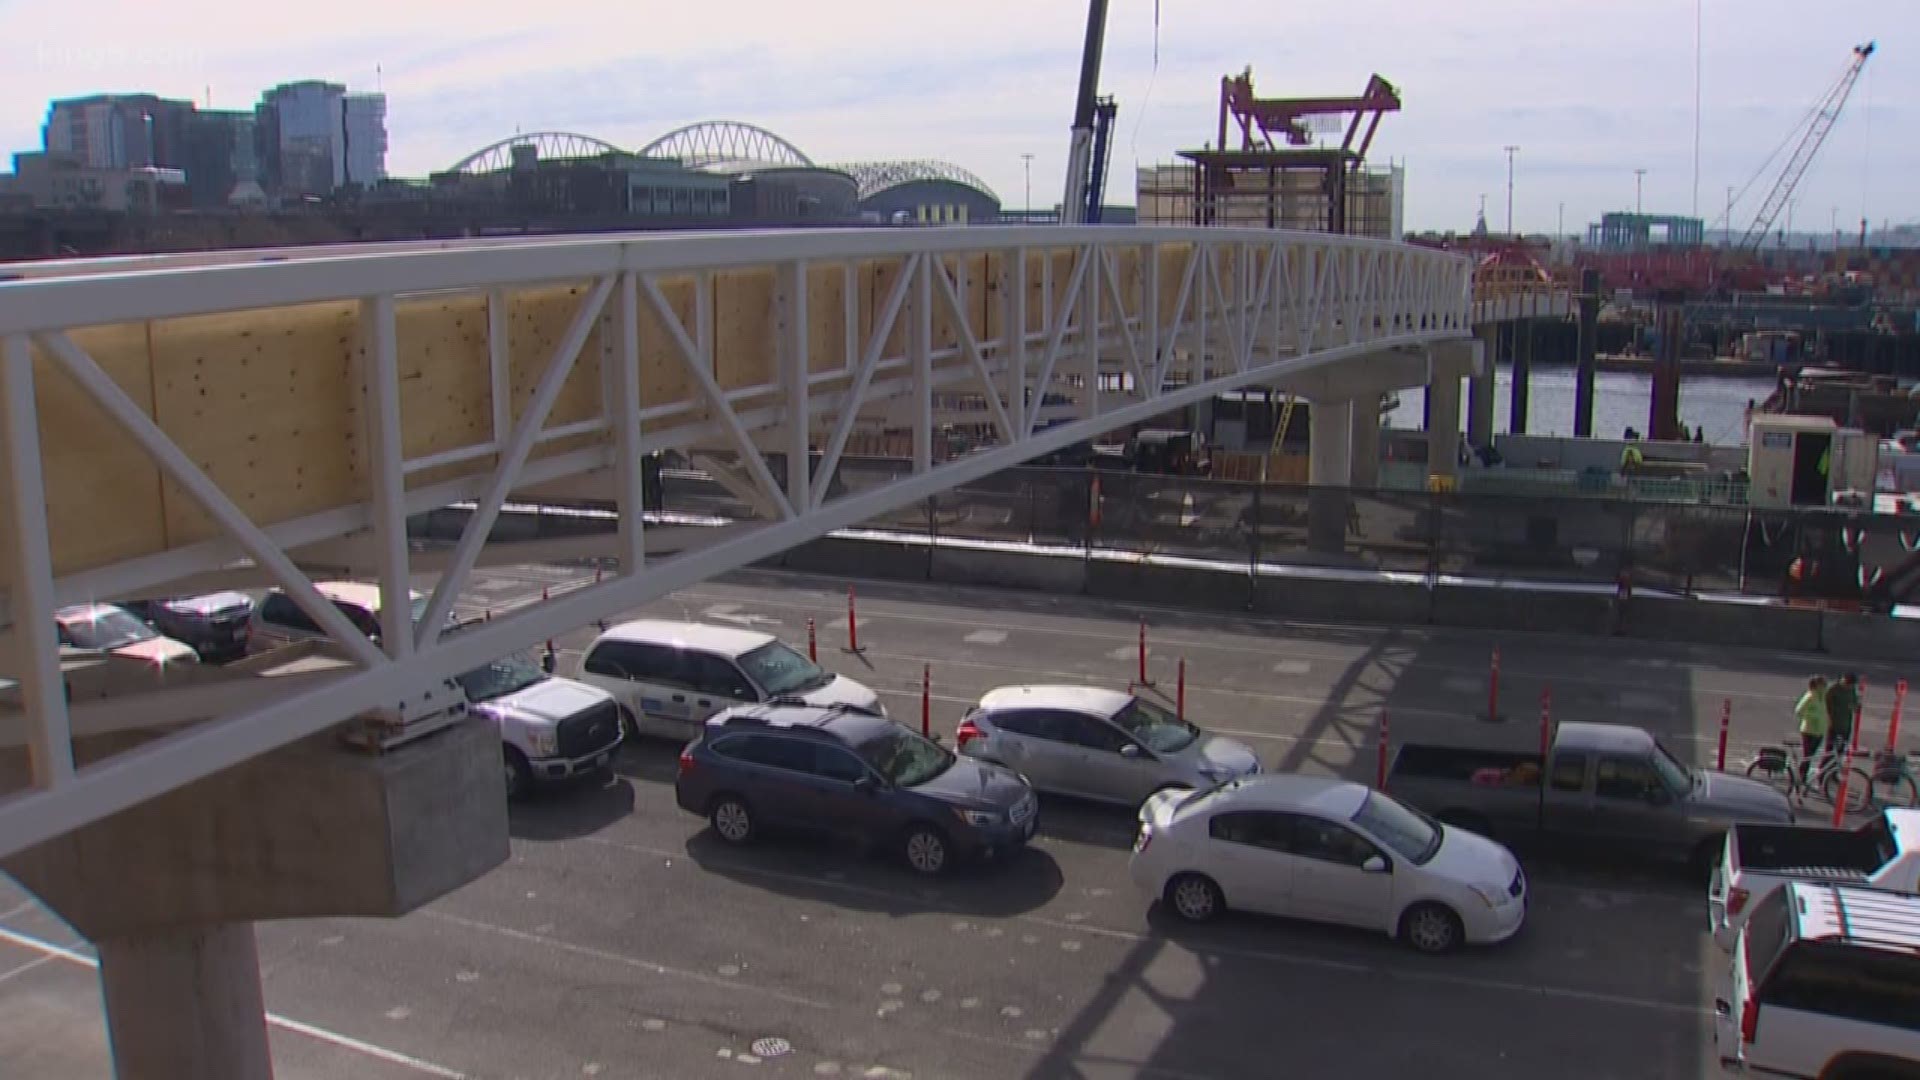 Many of the car waiting lanes will be reconfigured or closed through mid-summer. That will help make way for work on a footbridge that will connect a temporary Marion Street Bridge to the new terminal building.